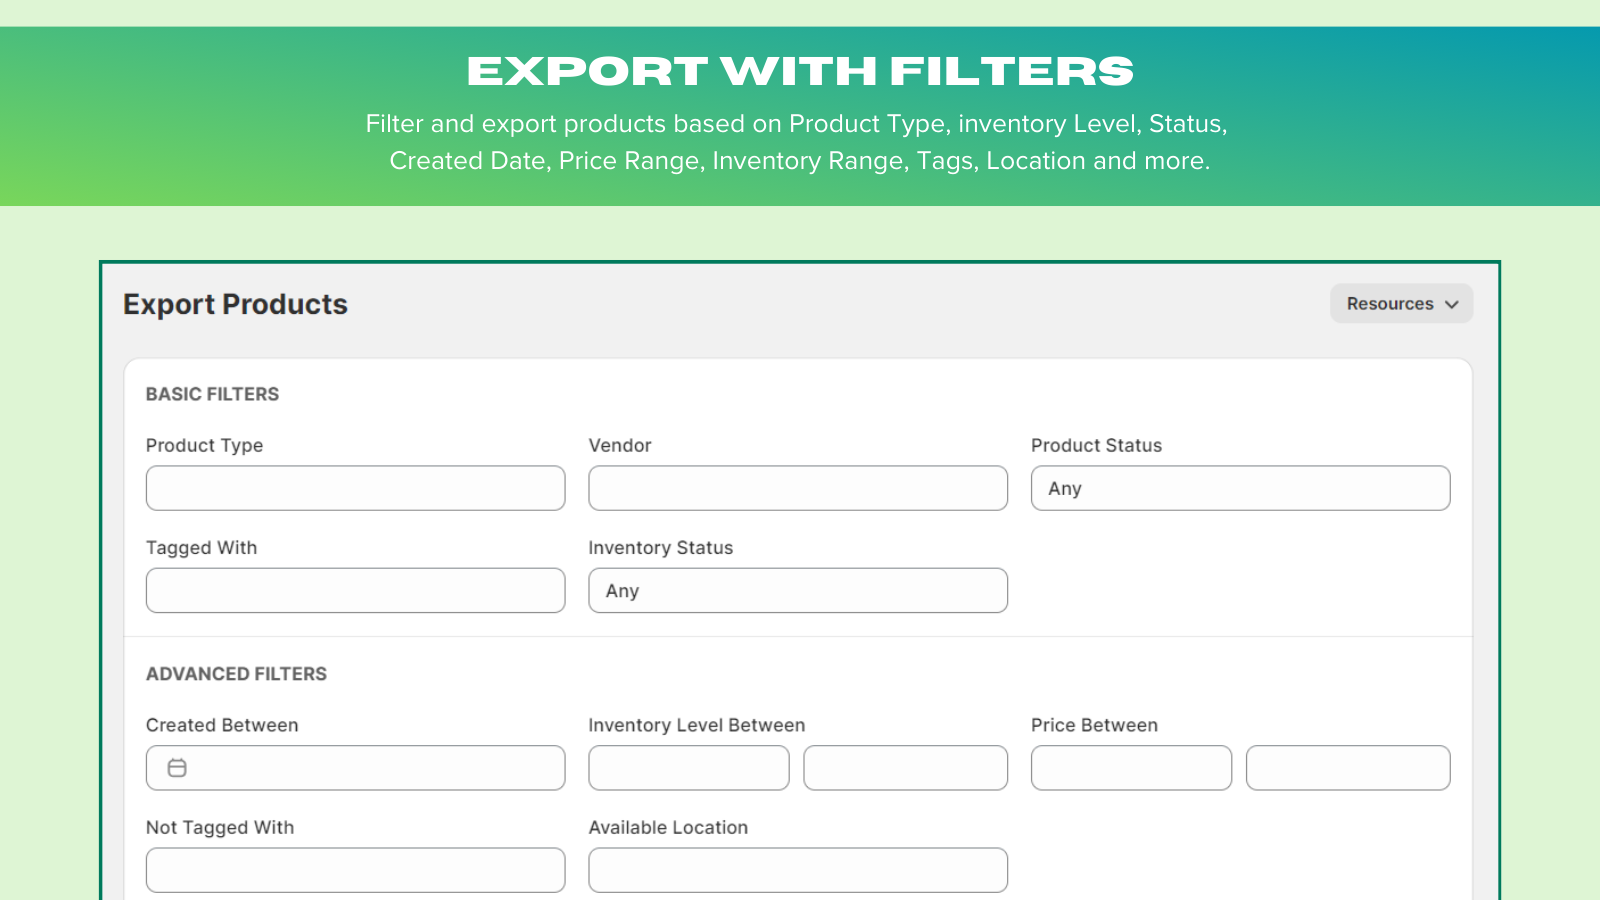 Filter & Export Products in a Excel Sheet.